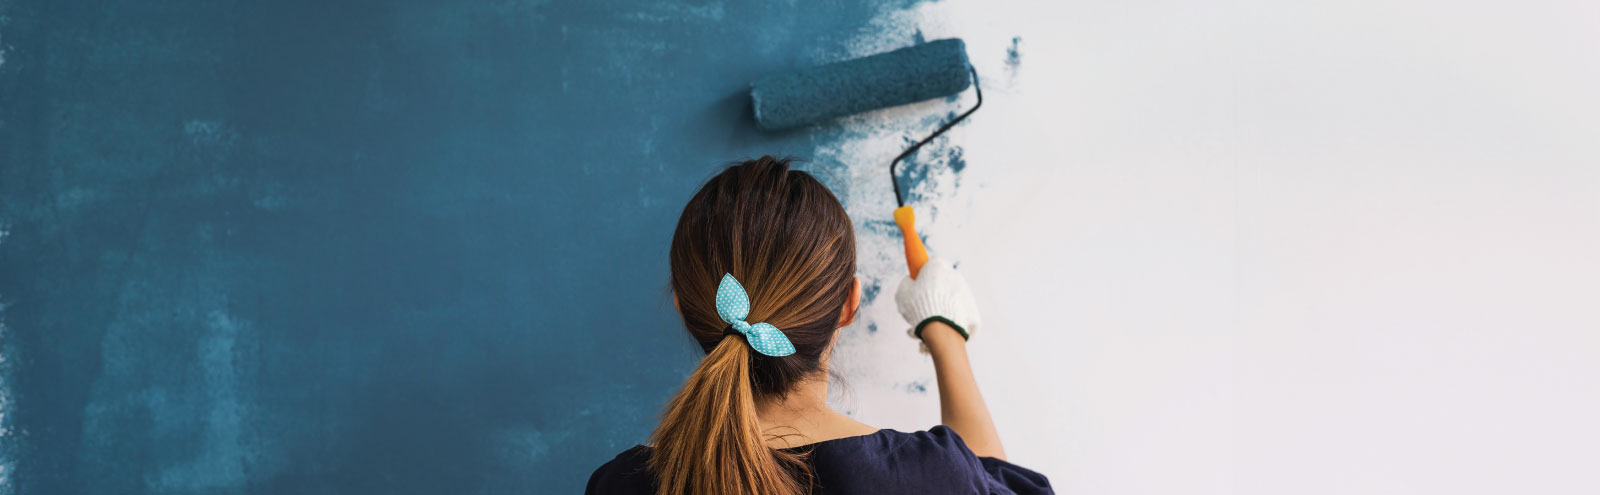 Back of woman painting wall blue.